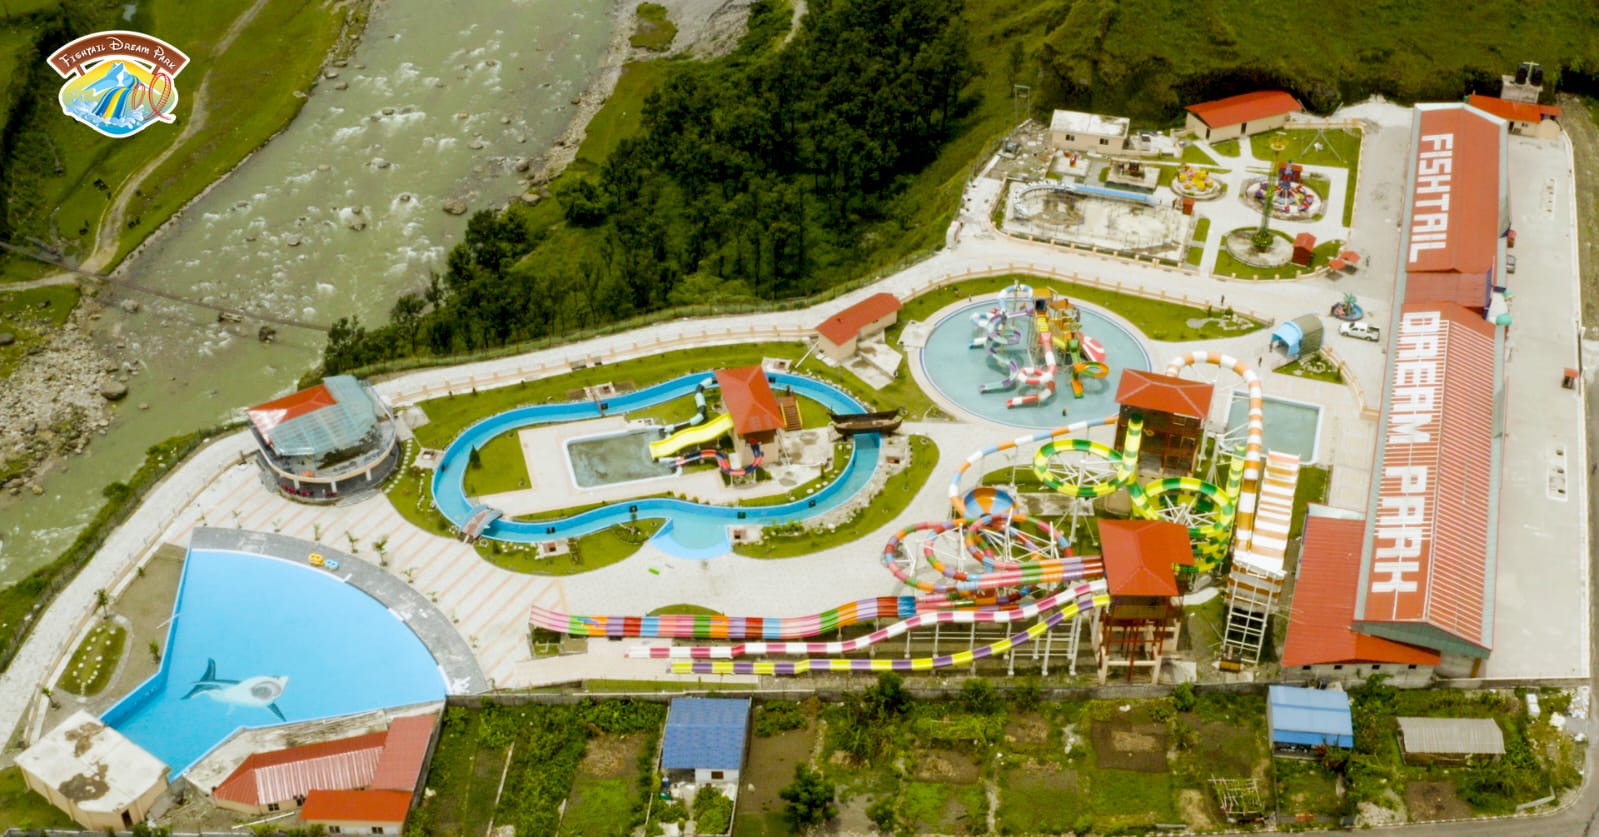 Pokhara’s biggest water sports fishtail dream park with an investment of 500 million